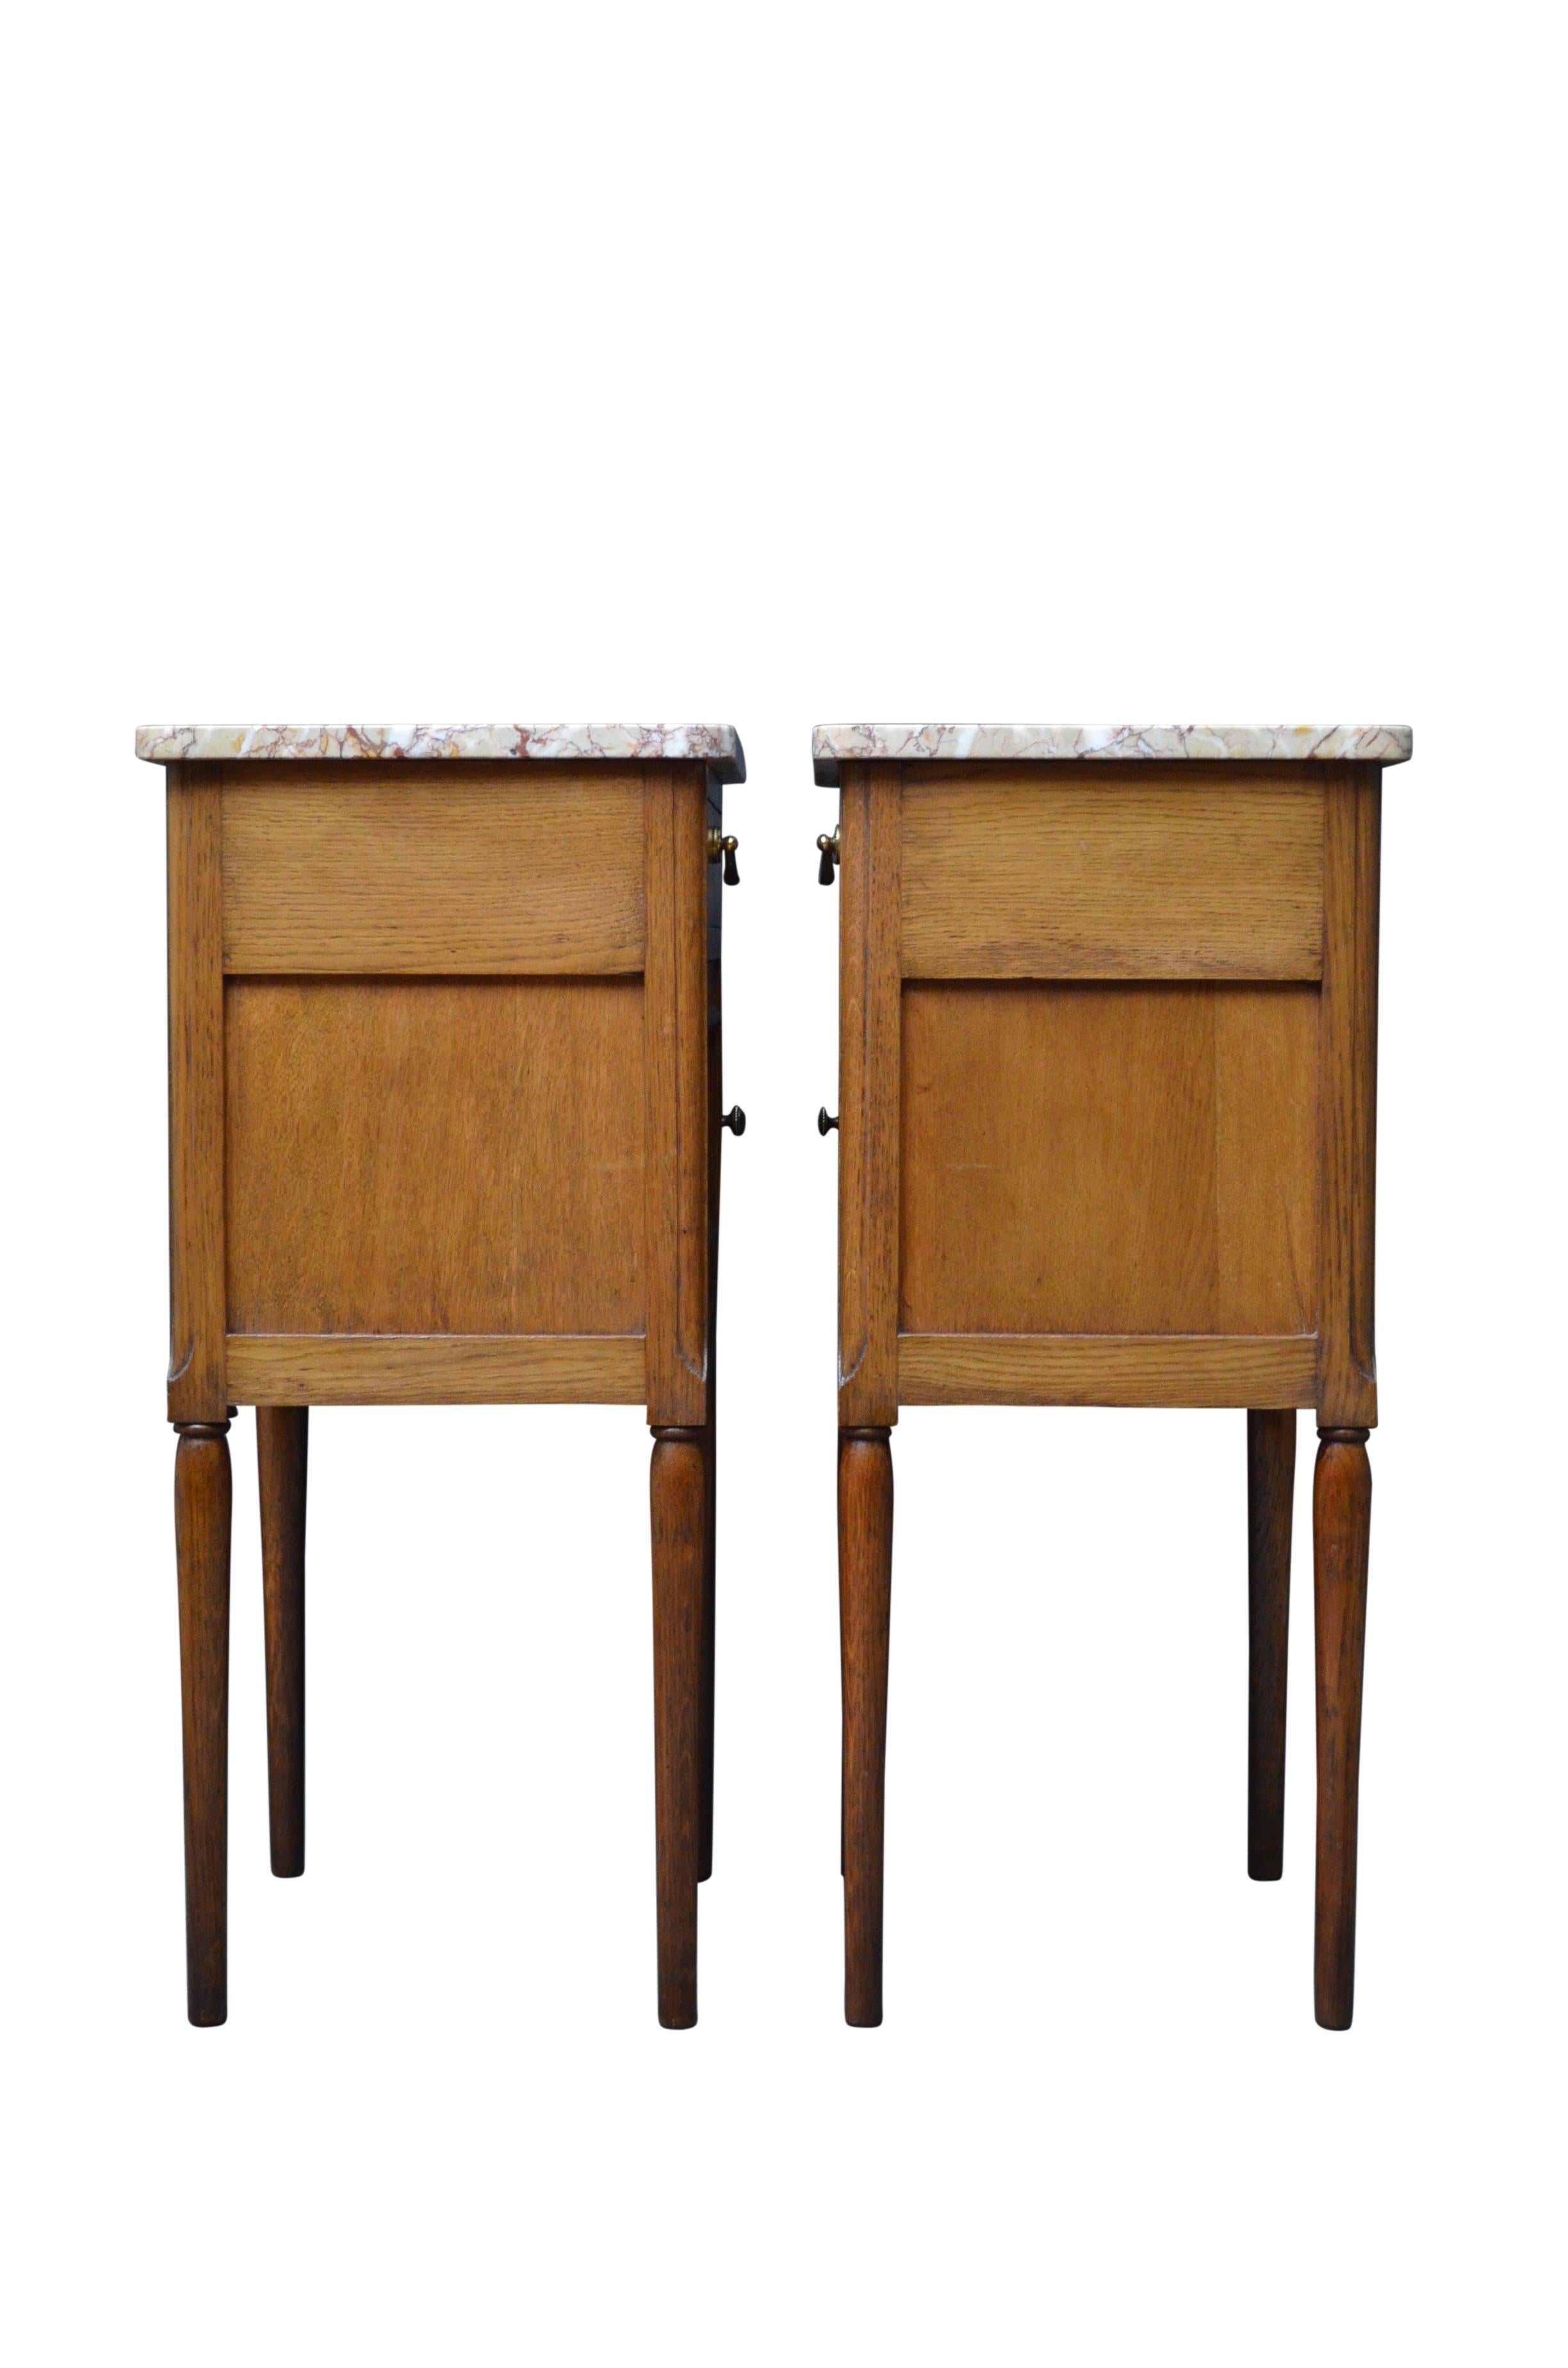 Pair of Turn of the Century Bedside Cabinets in Oak 1